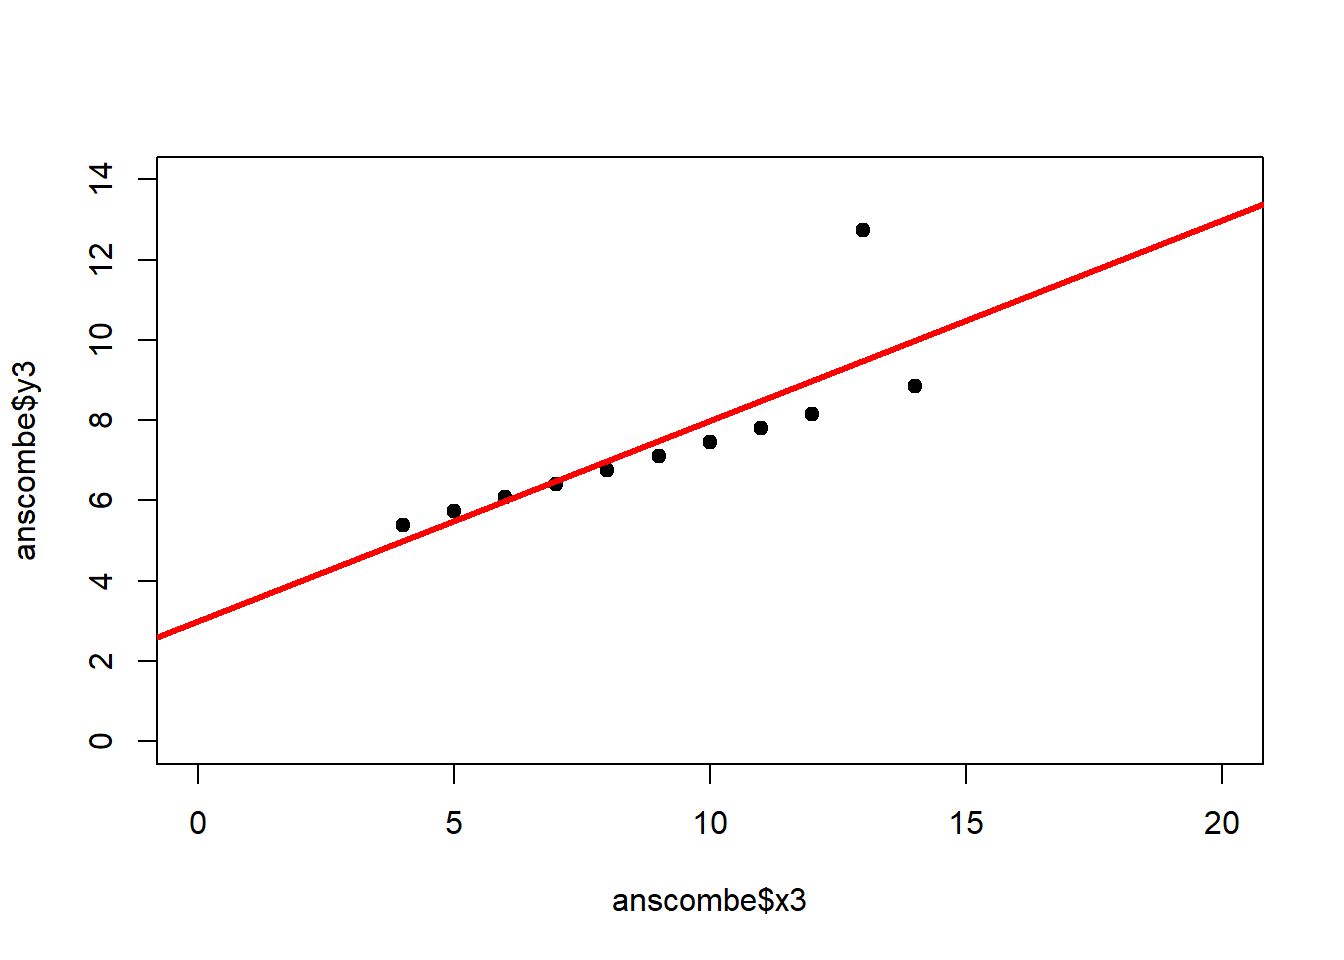 Regression analysis of the four @anscombe1973 datasets, yielding virtually the same parameter estimates and coefficients of determination (see above), despite wildly different relationships between $x$ and $y$.